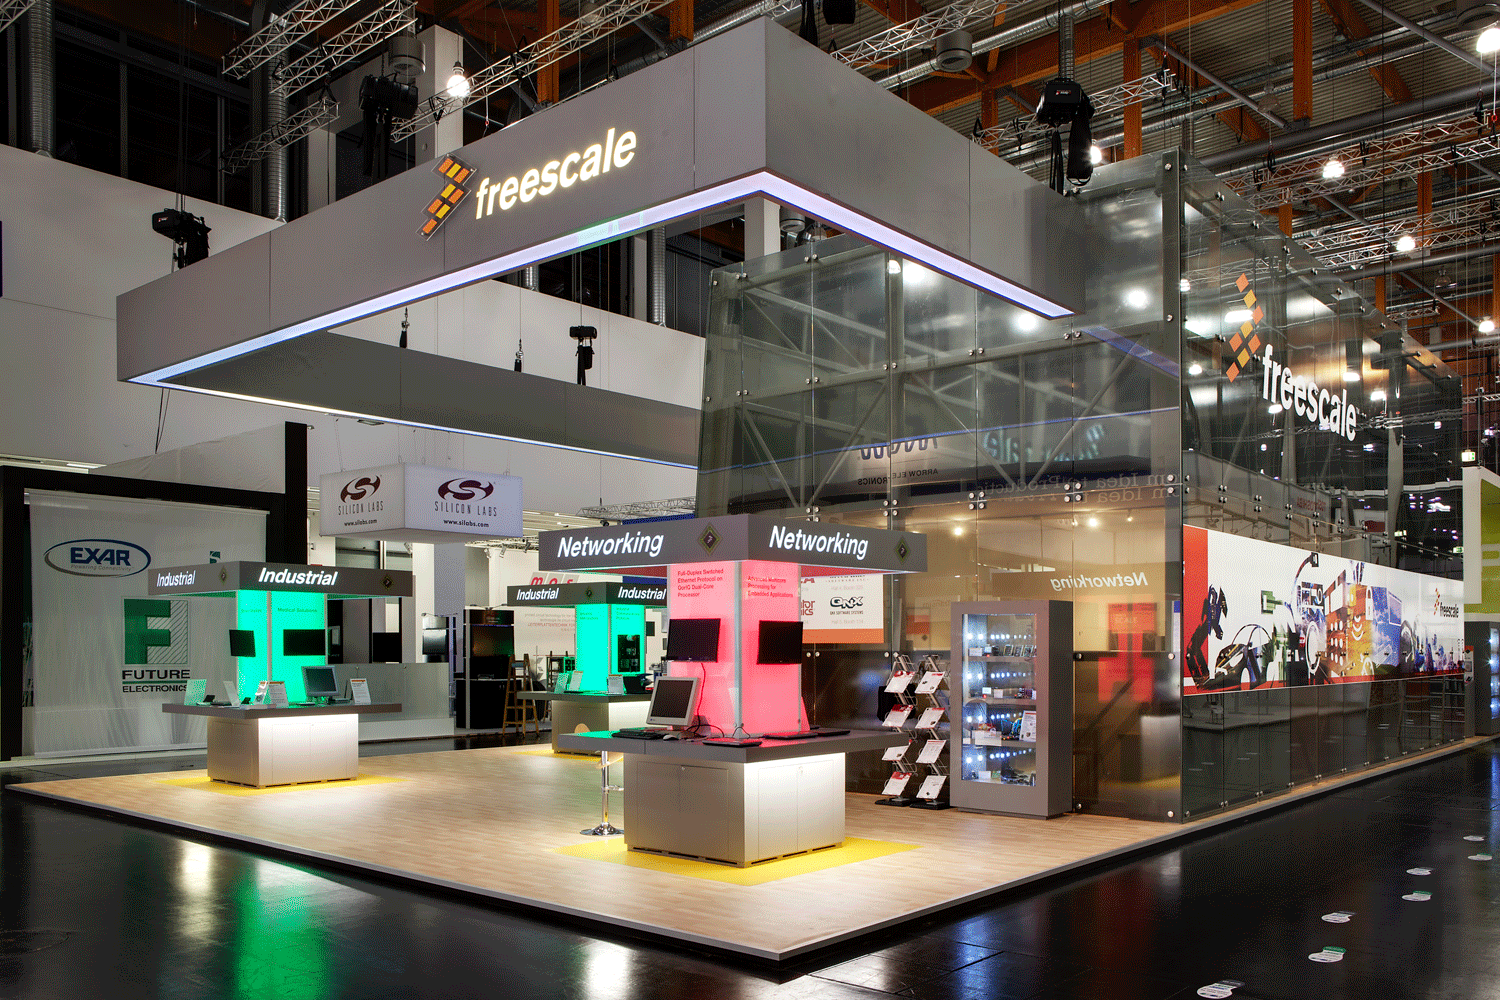 Freescale stand, Nürnberg, Germany